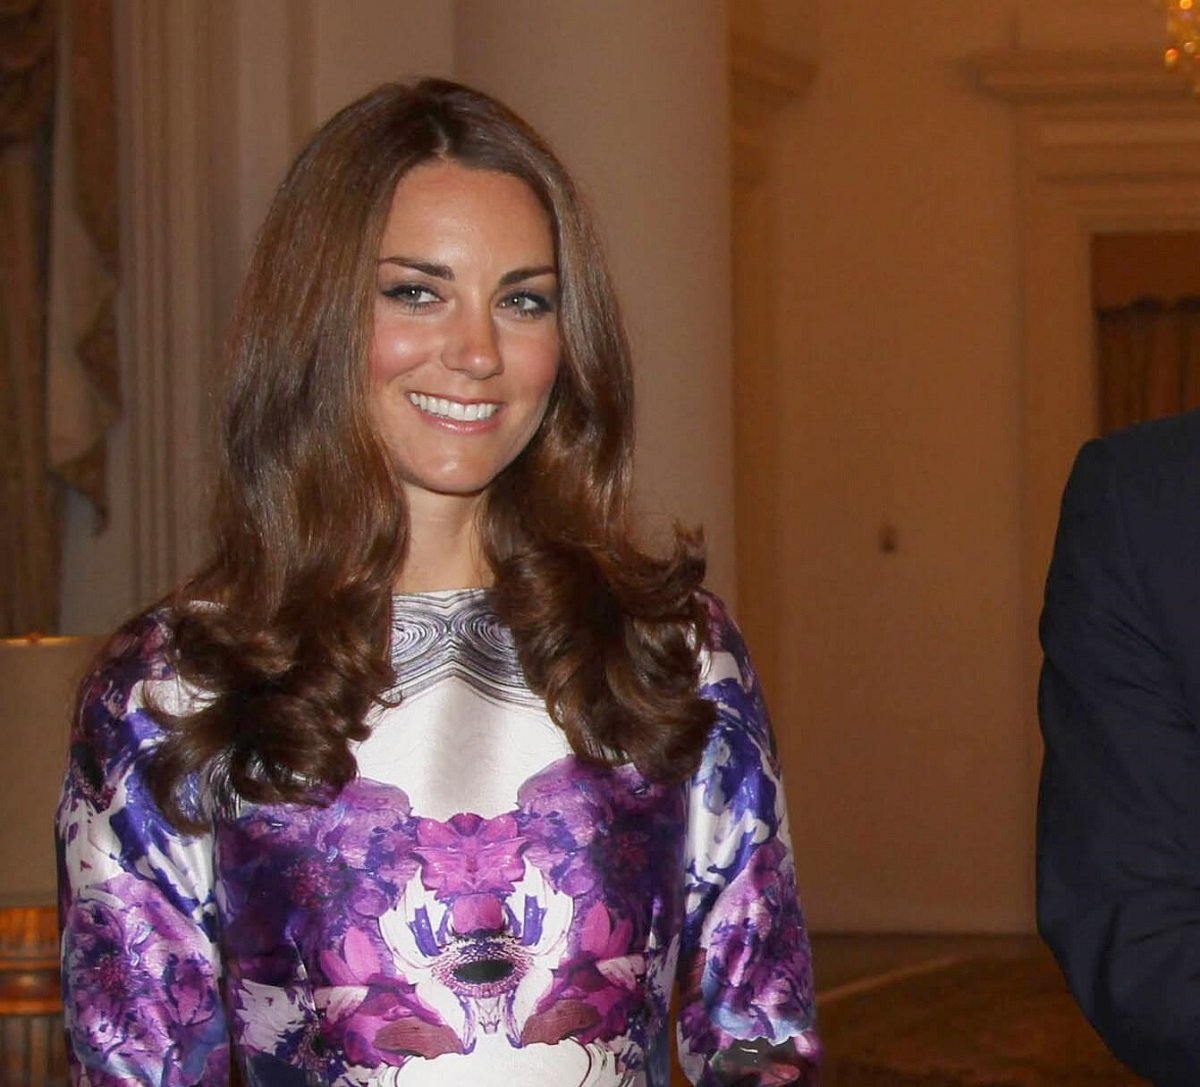 Kate Middleton at a State Dinner on day 1 of Diamond Jubilee tour in Singapore